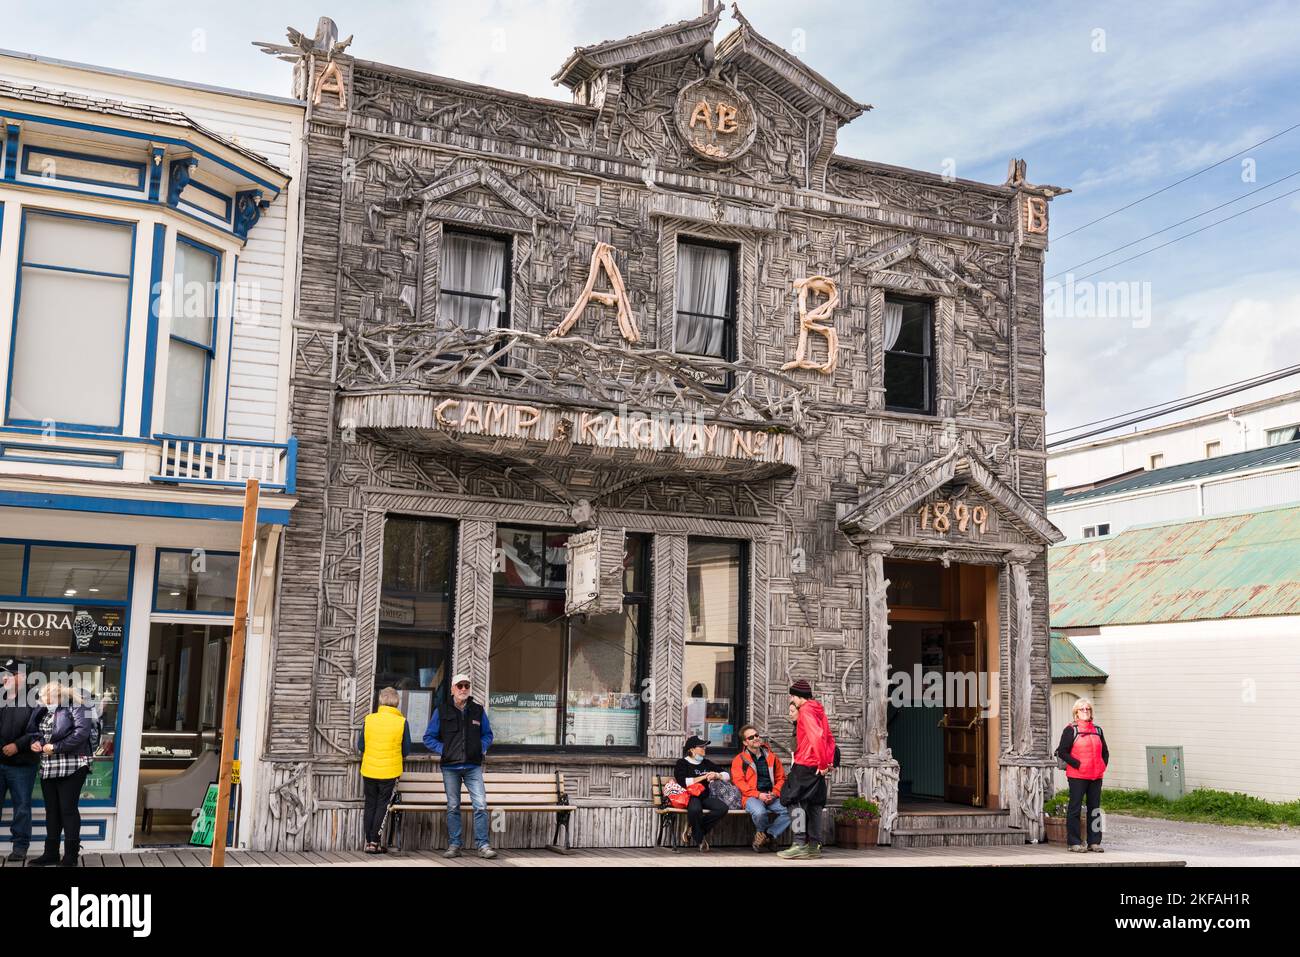 Skagway, AK - September 7, 2022: The historic Arctic Brotherhood Building is a popular stop with cruise tourists in Skagway, Alaska Stock Photo